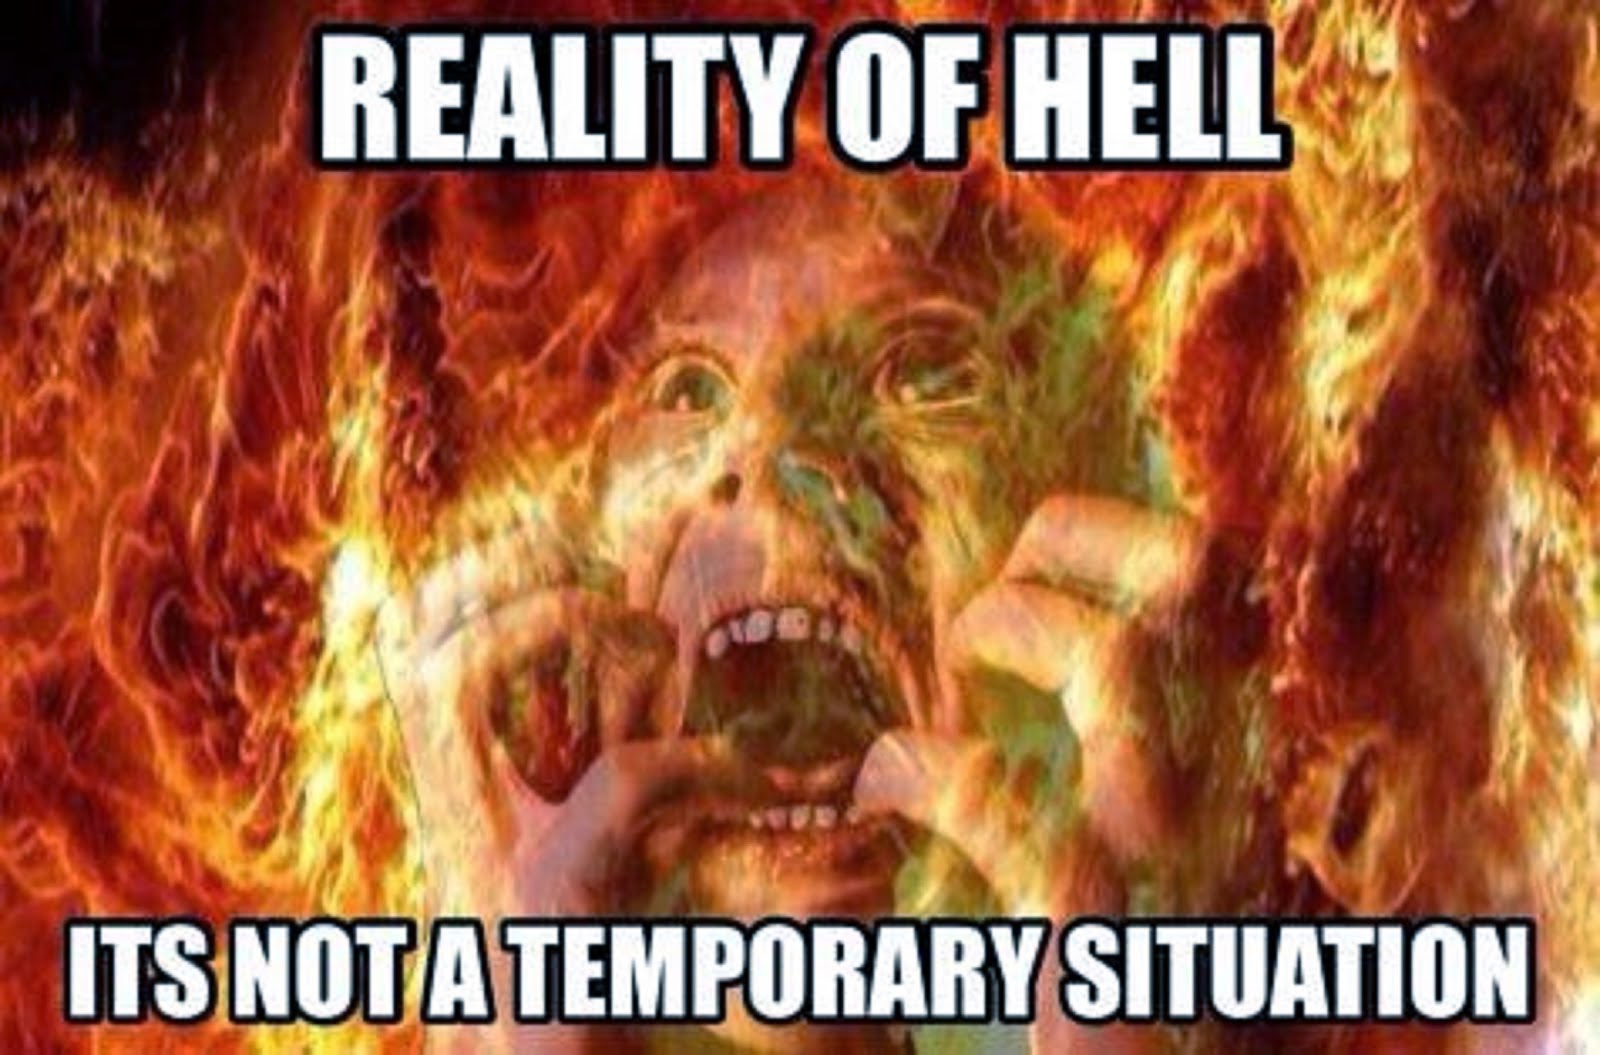 REALITY OF HELL